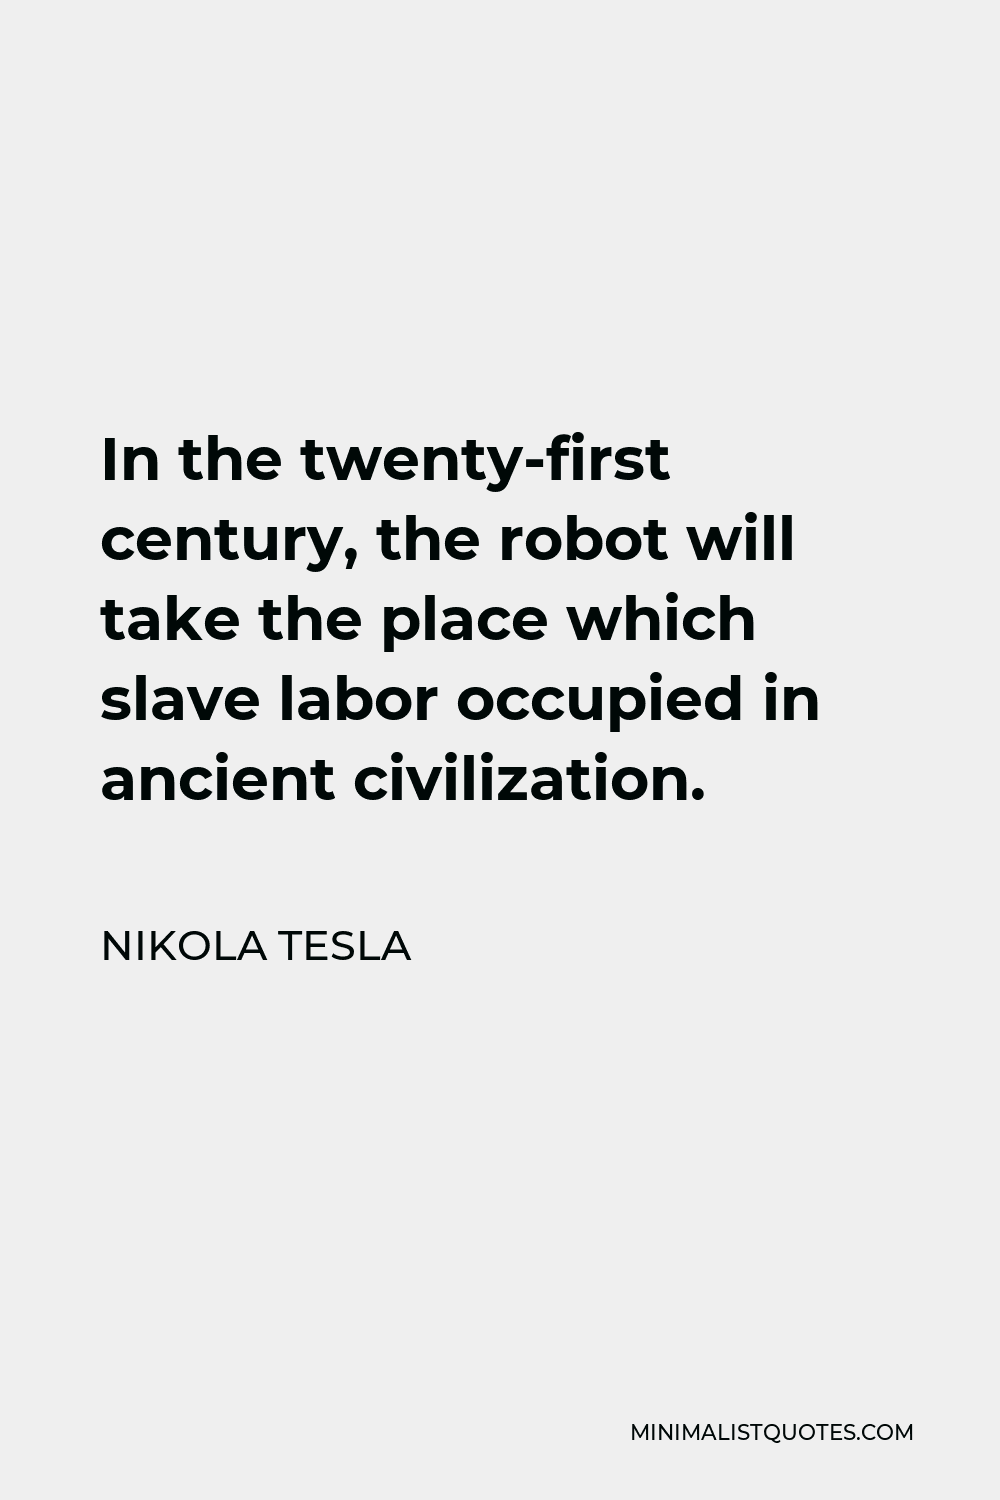 Nikola Tesla Quote - In the twenty-first century, the robot will take the place which slave labor occupied in ancient civilization.